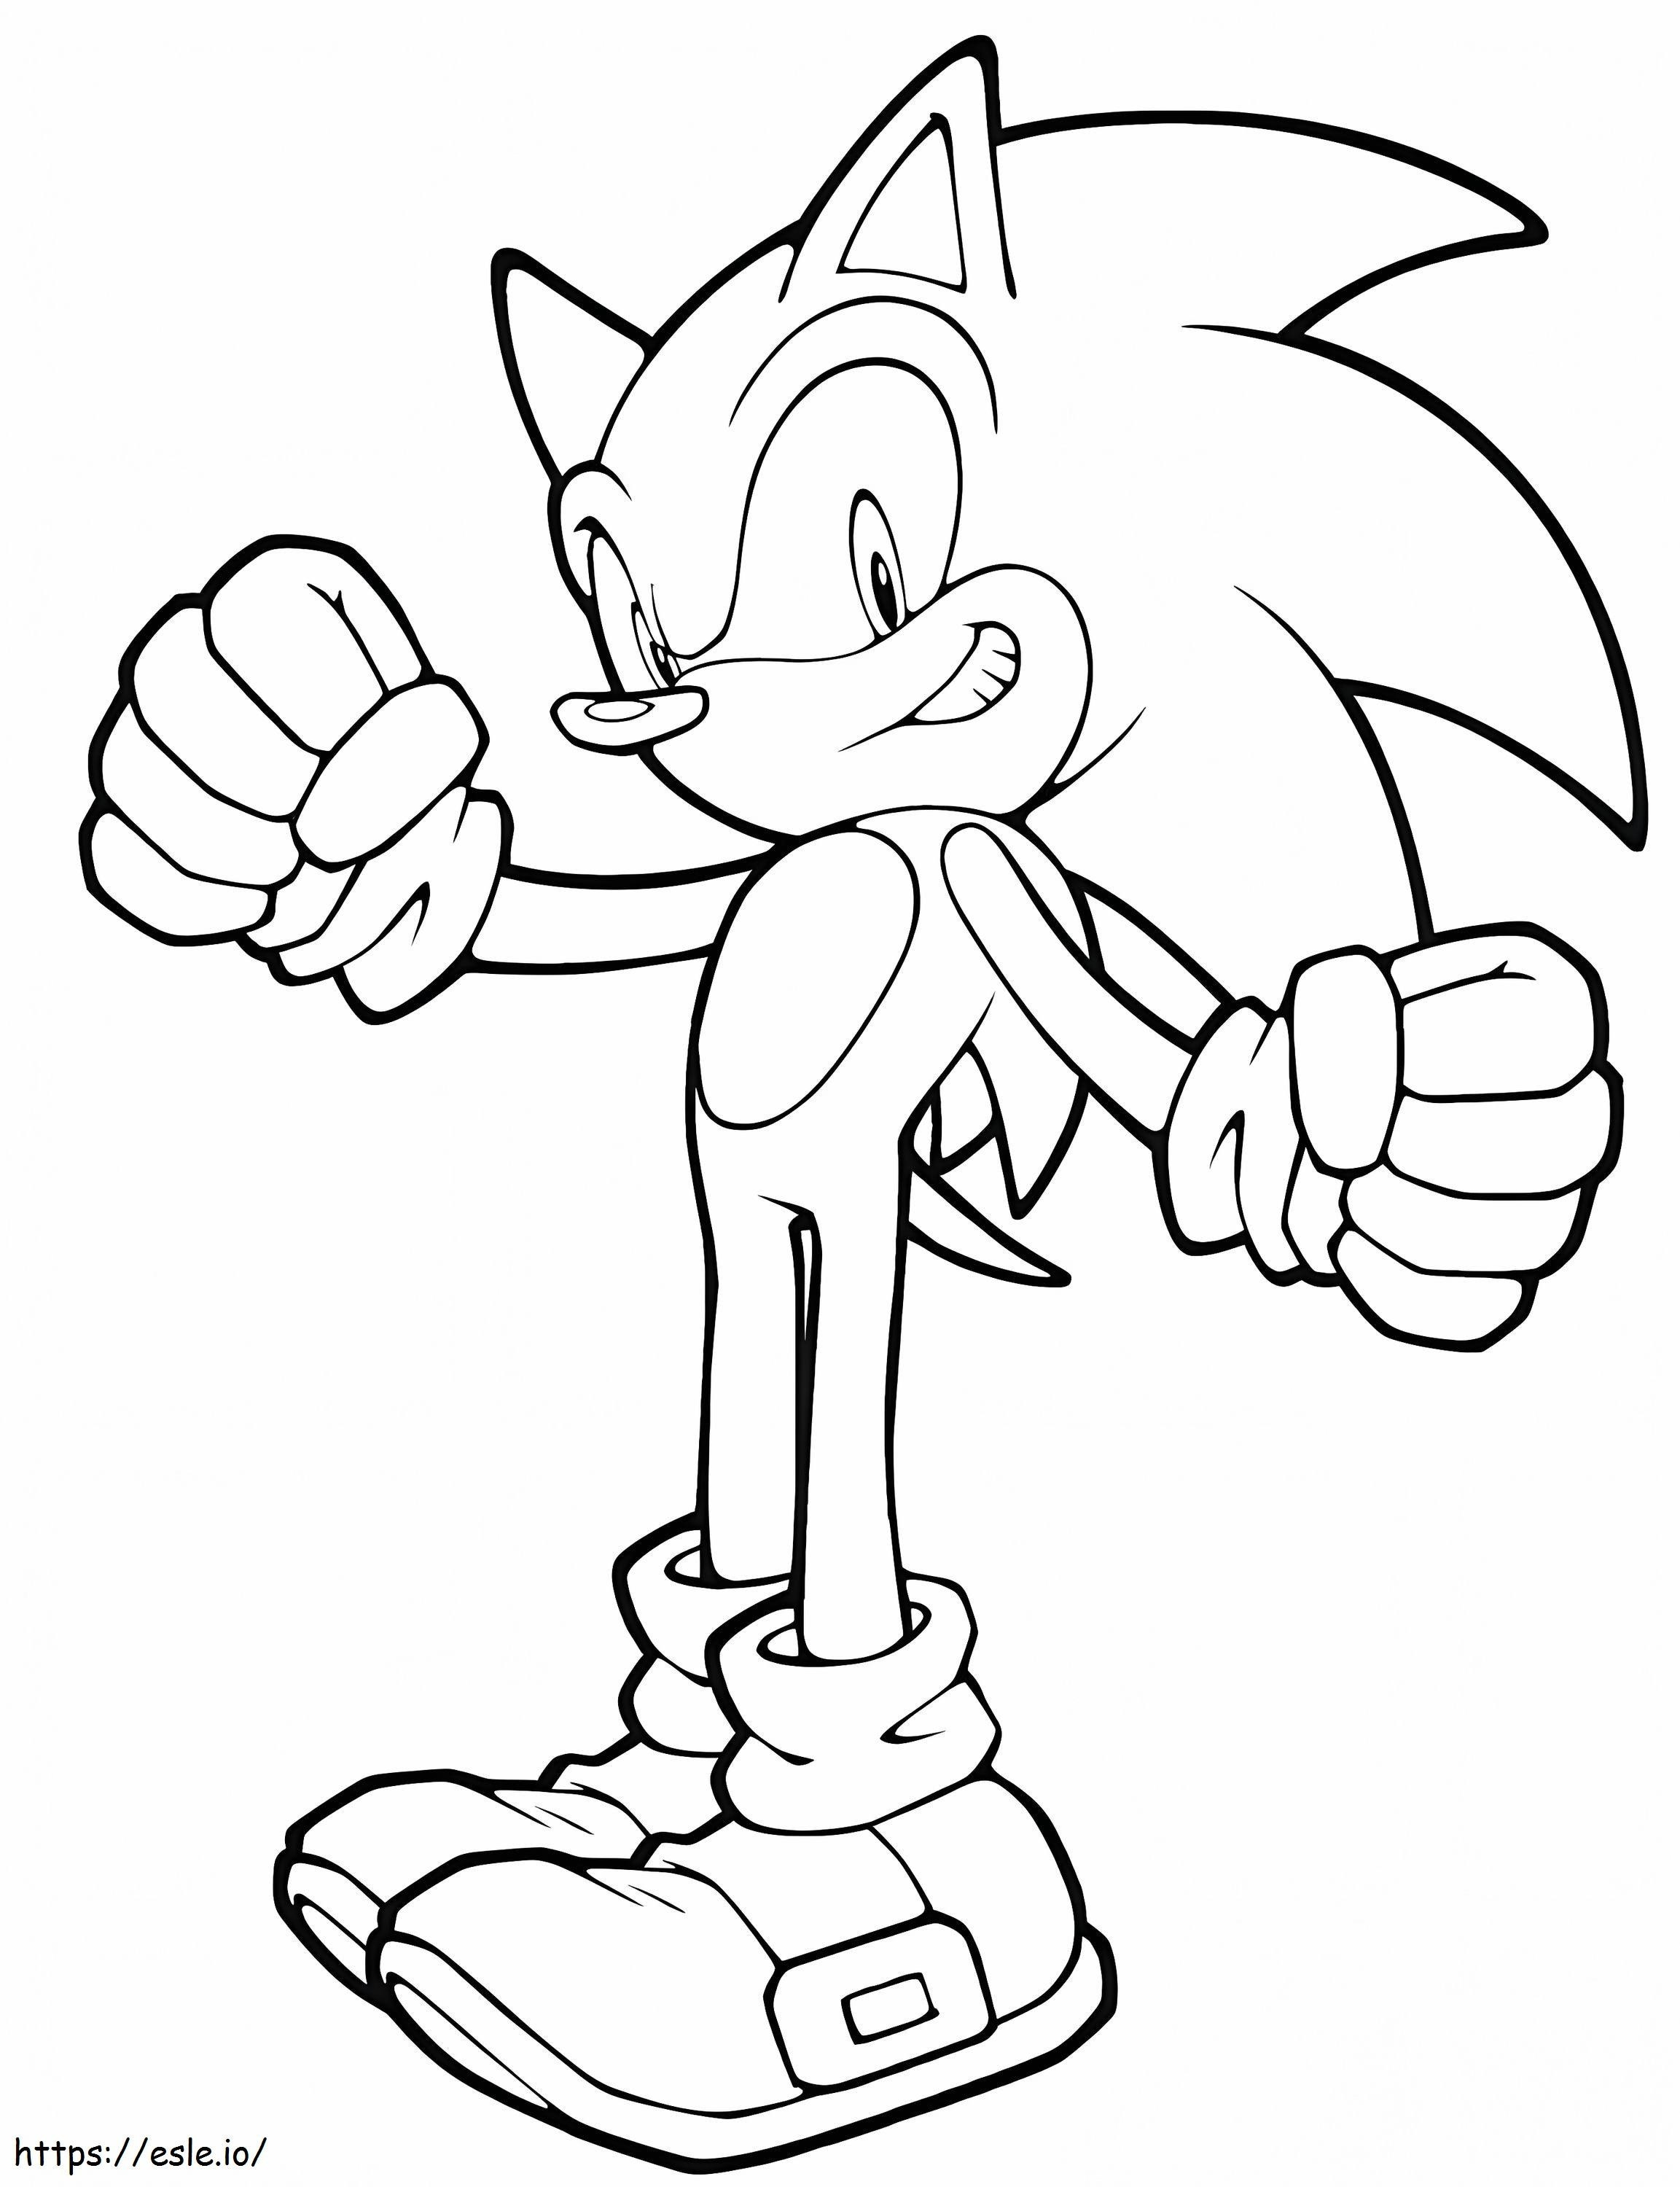 Printable Sonic coloring page